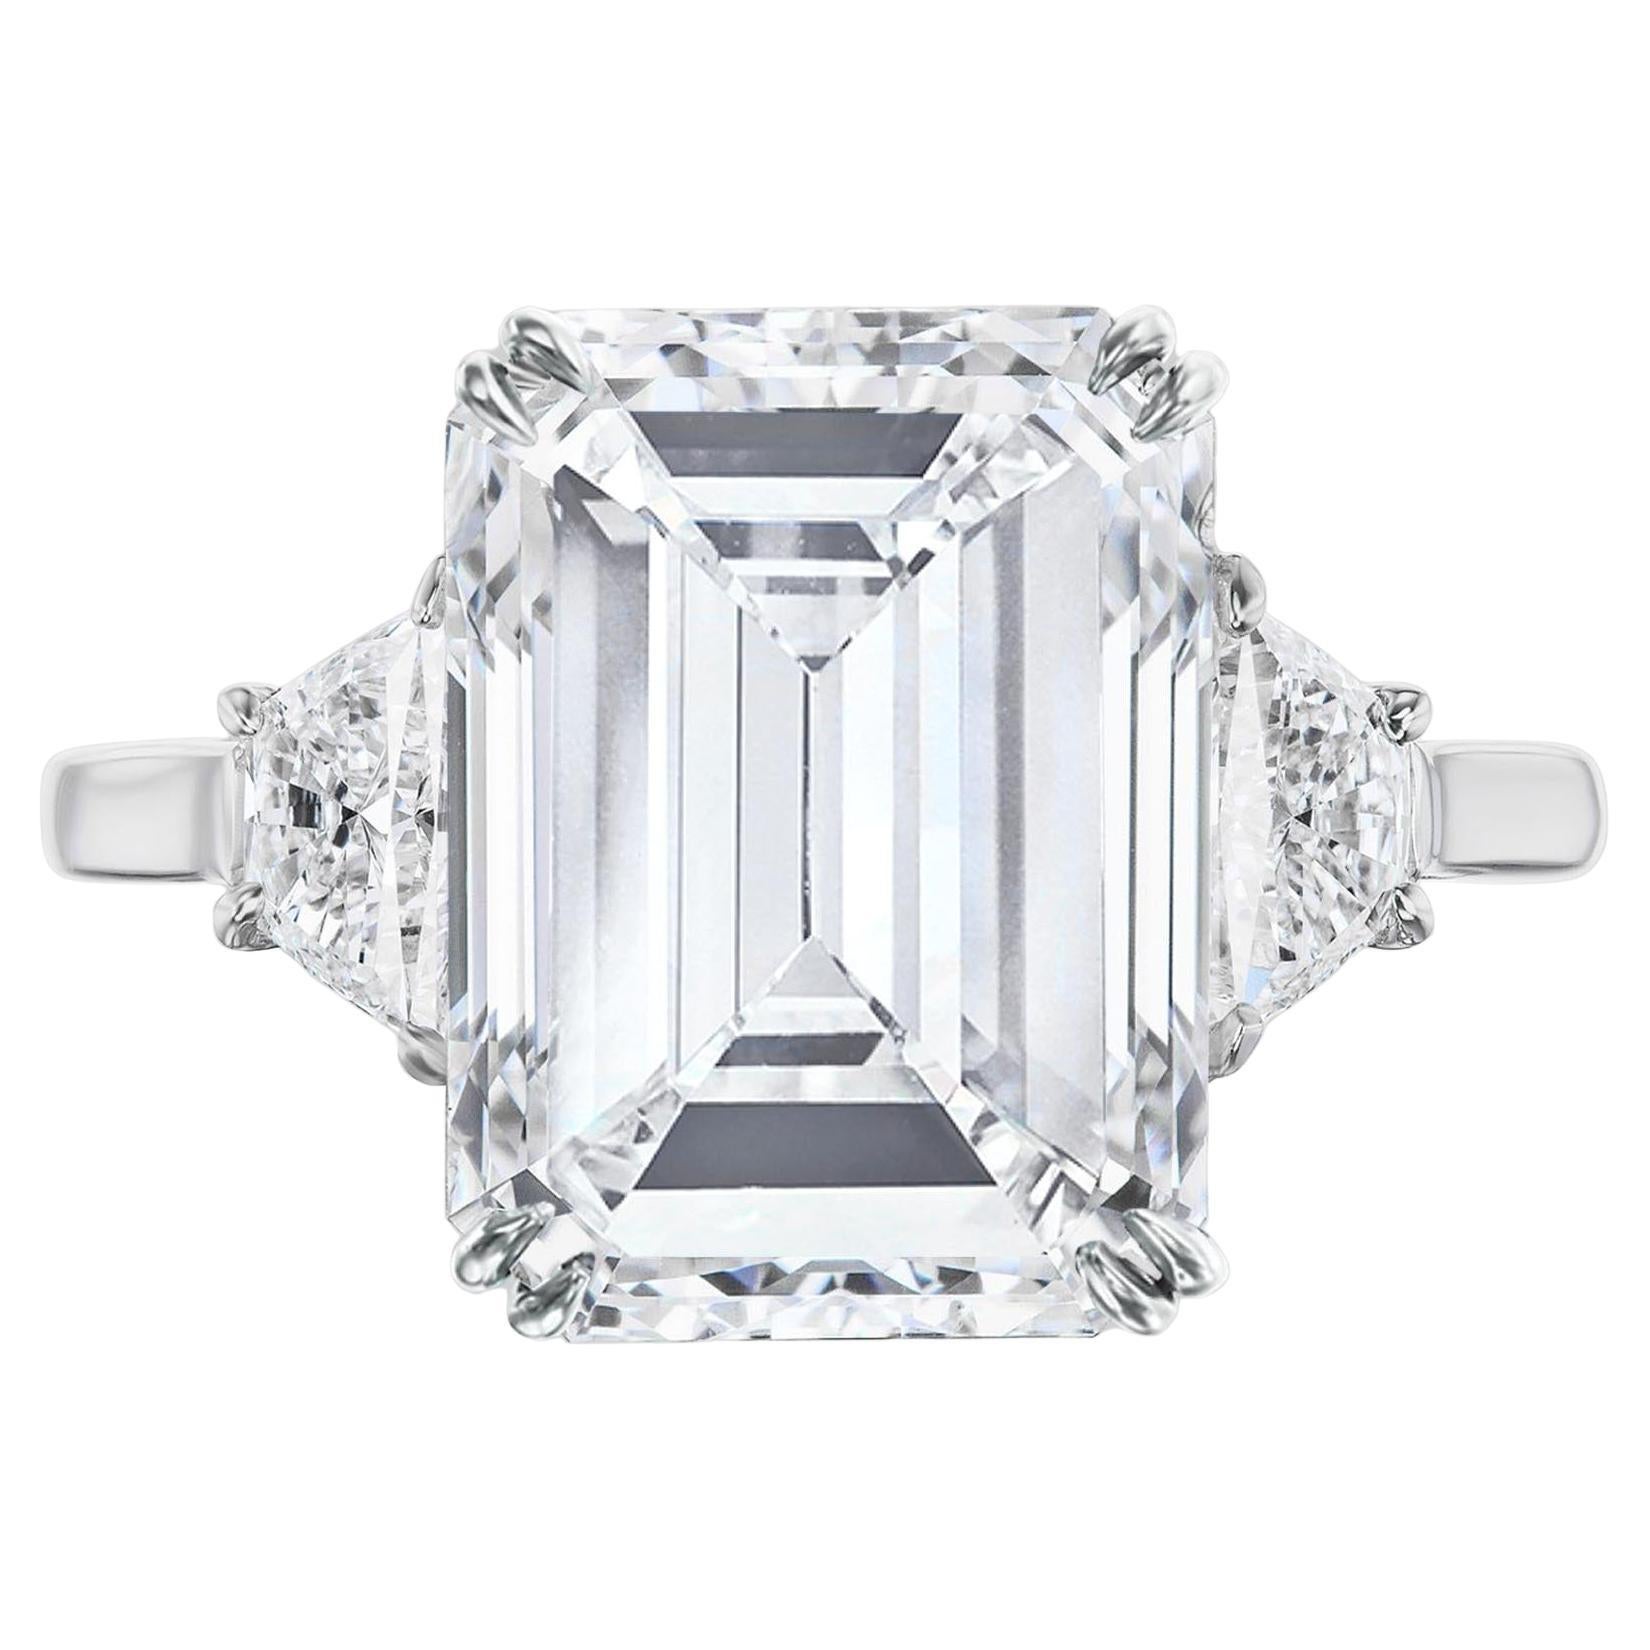 Flawless GIA Certified 6 Carat Emerald Cut Diamond Ring Ideal Proportions For Sale